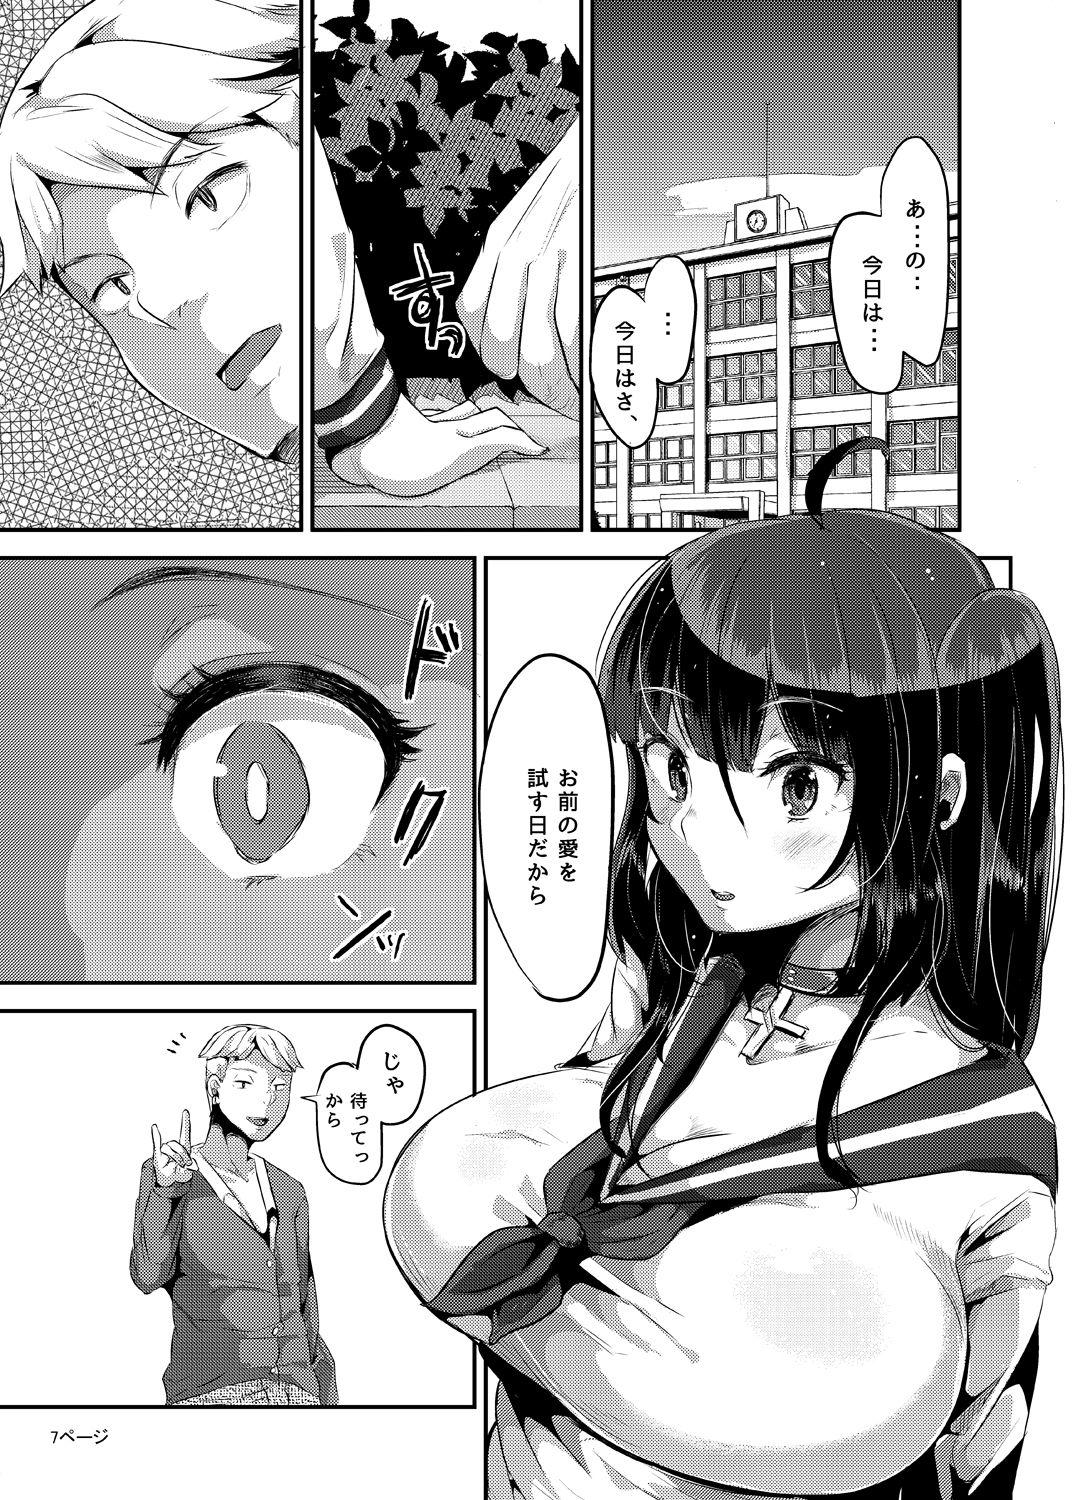 Ginger Sukisukisukisukisukisukisukisuki ver. 3 Peituda - Page 8